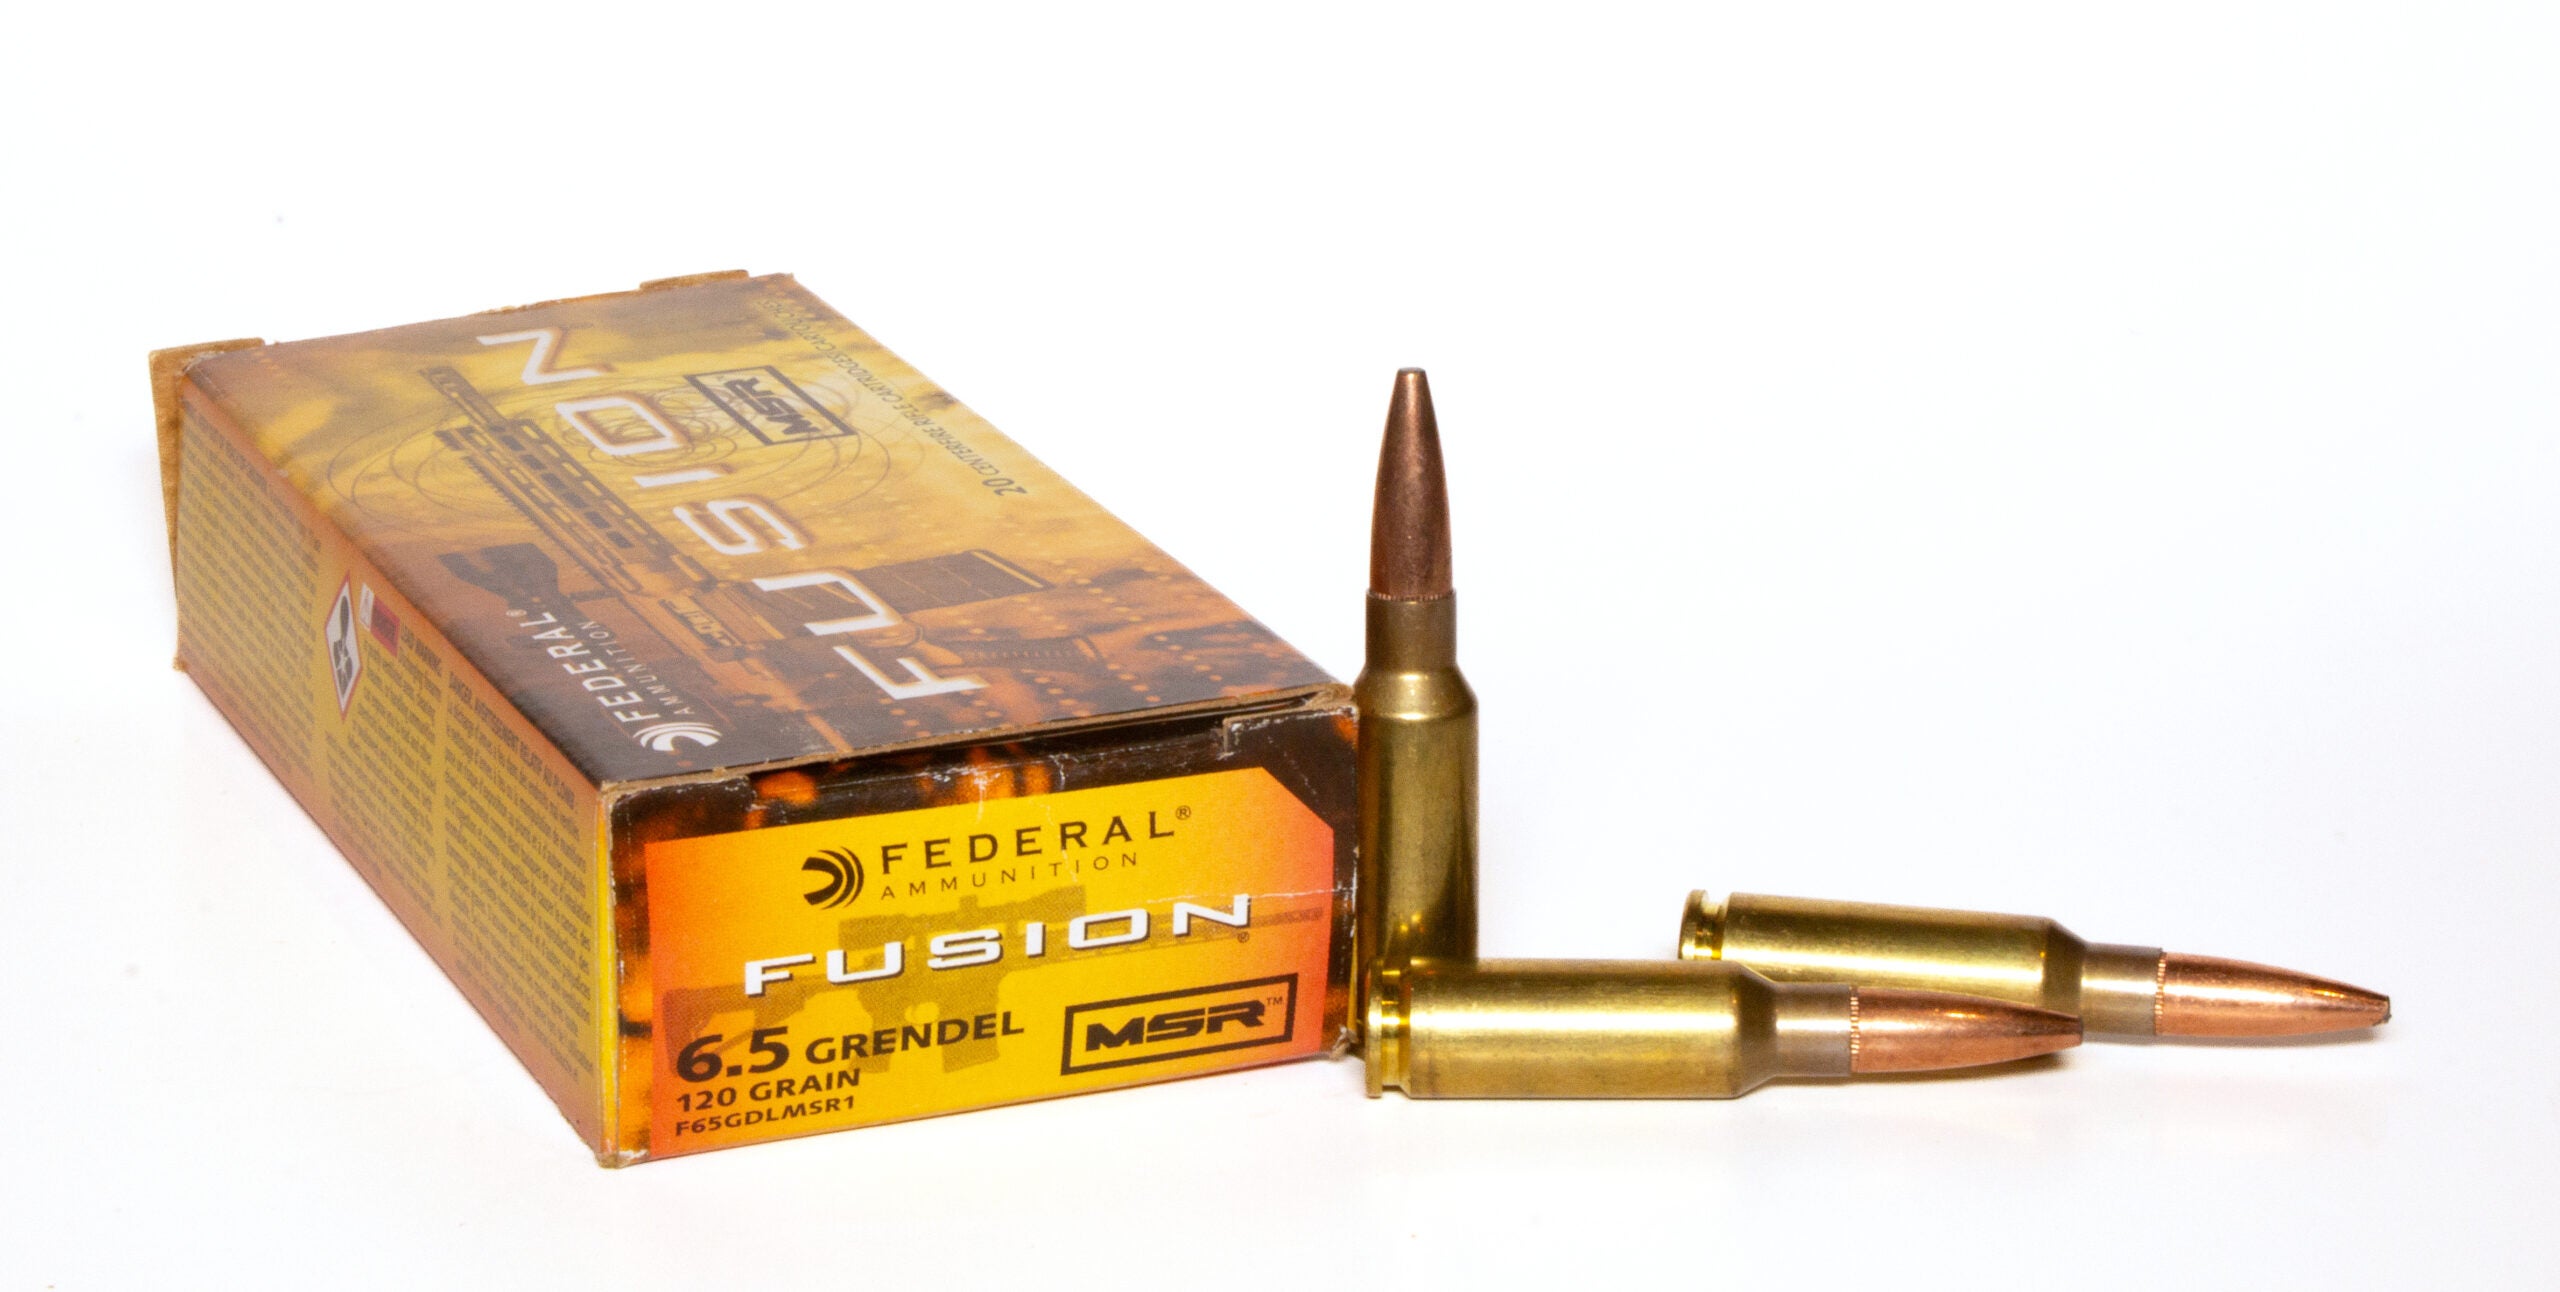 Box of 6.5 Grendel ammo with three loose cartridges on white background